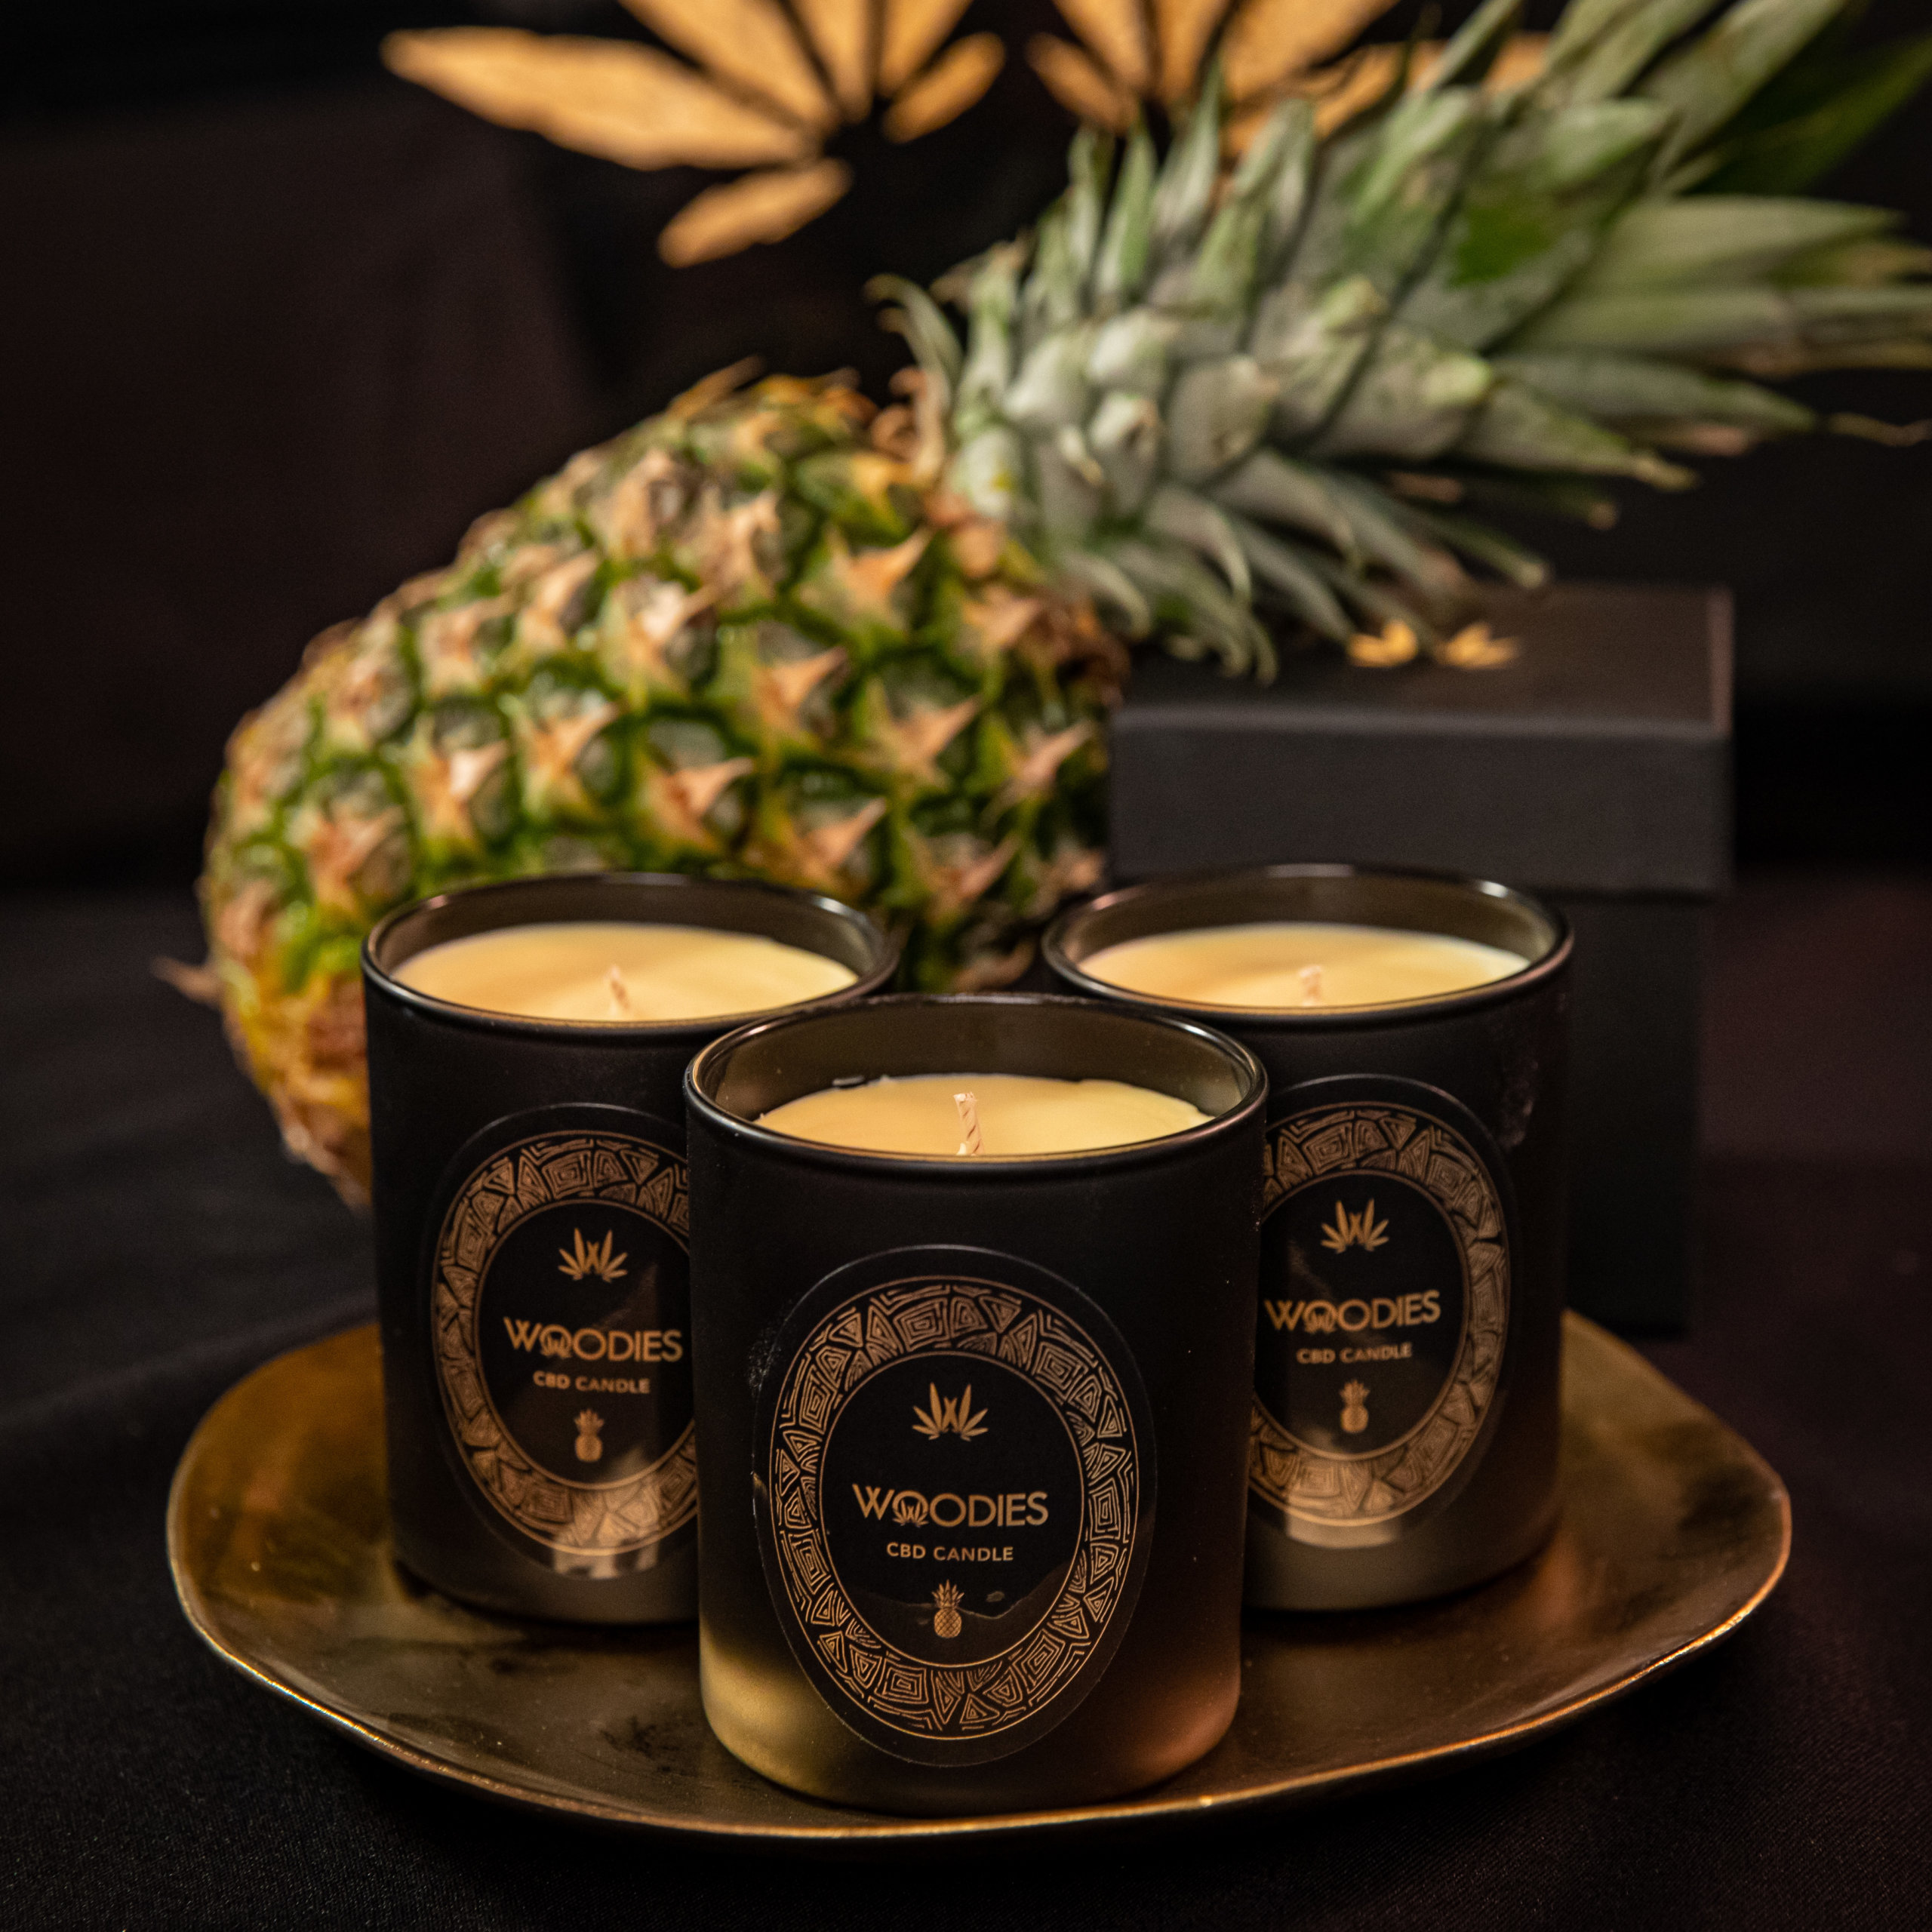 Woodies Pineapple Scented CBD Candle